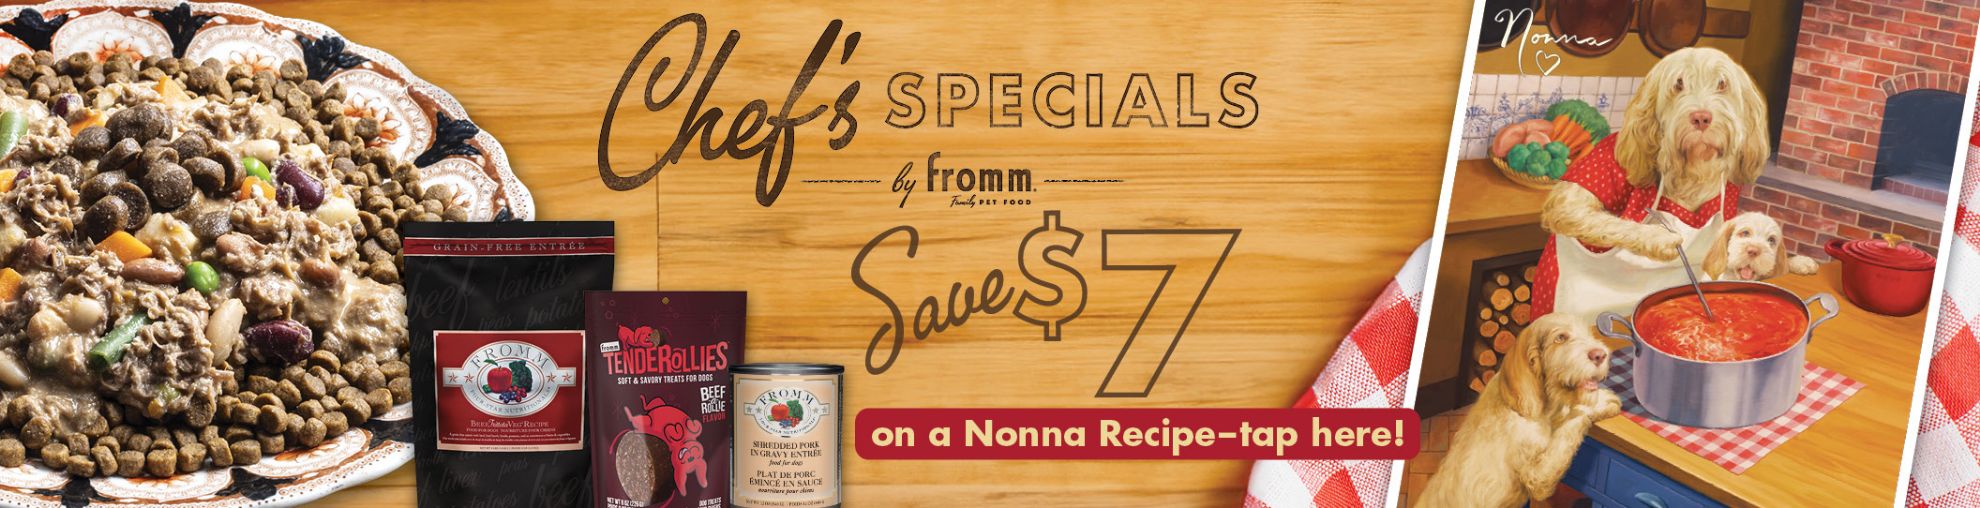 OFFER F2948 Save $7 on a Nonna Frommagia Recipe